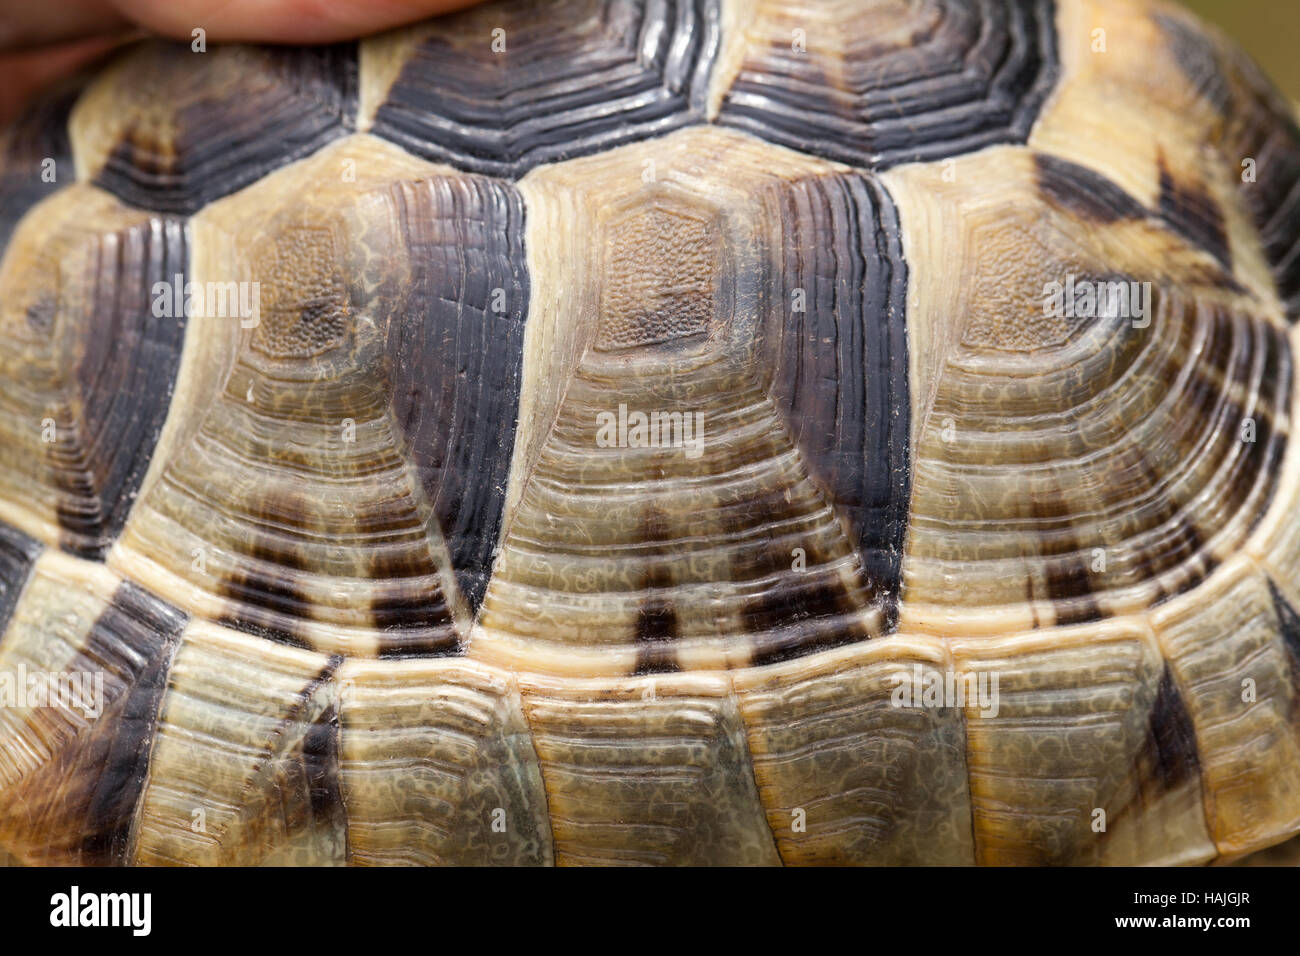 Mediterranean Spur-thighed Tortoise (Testudo graeca ibera). Carapace, or upper shell, scutes showing periods of growth rings. Head end right. Stock Photo